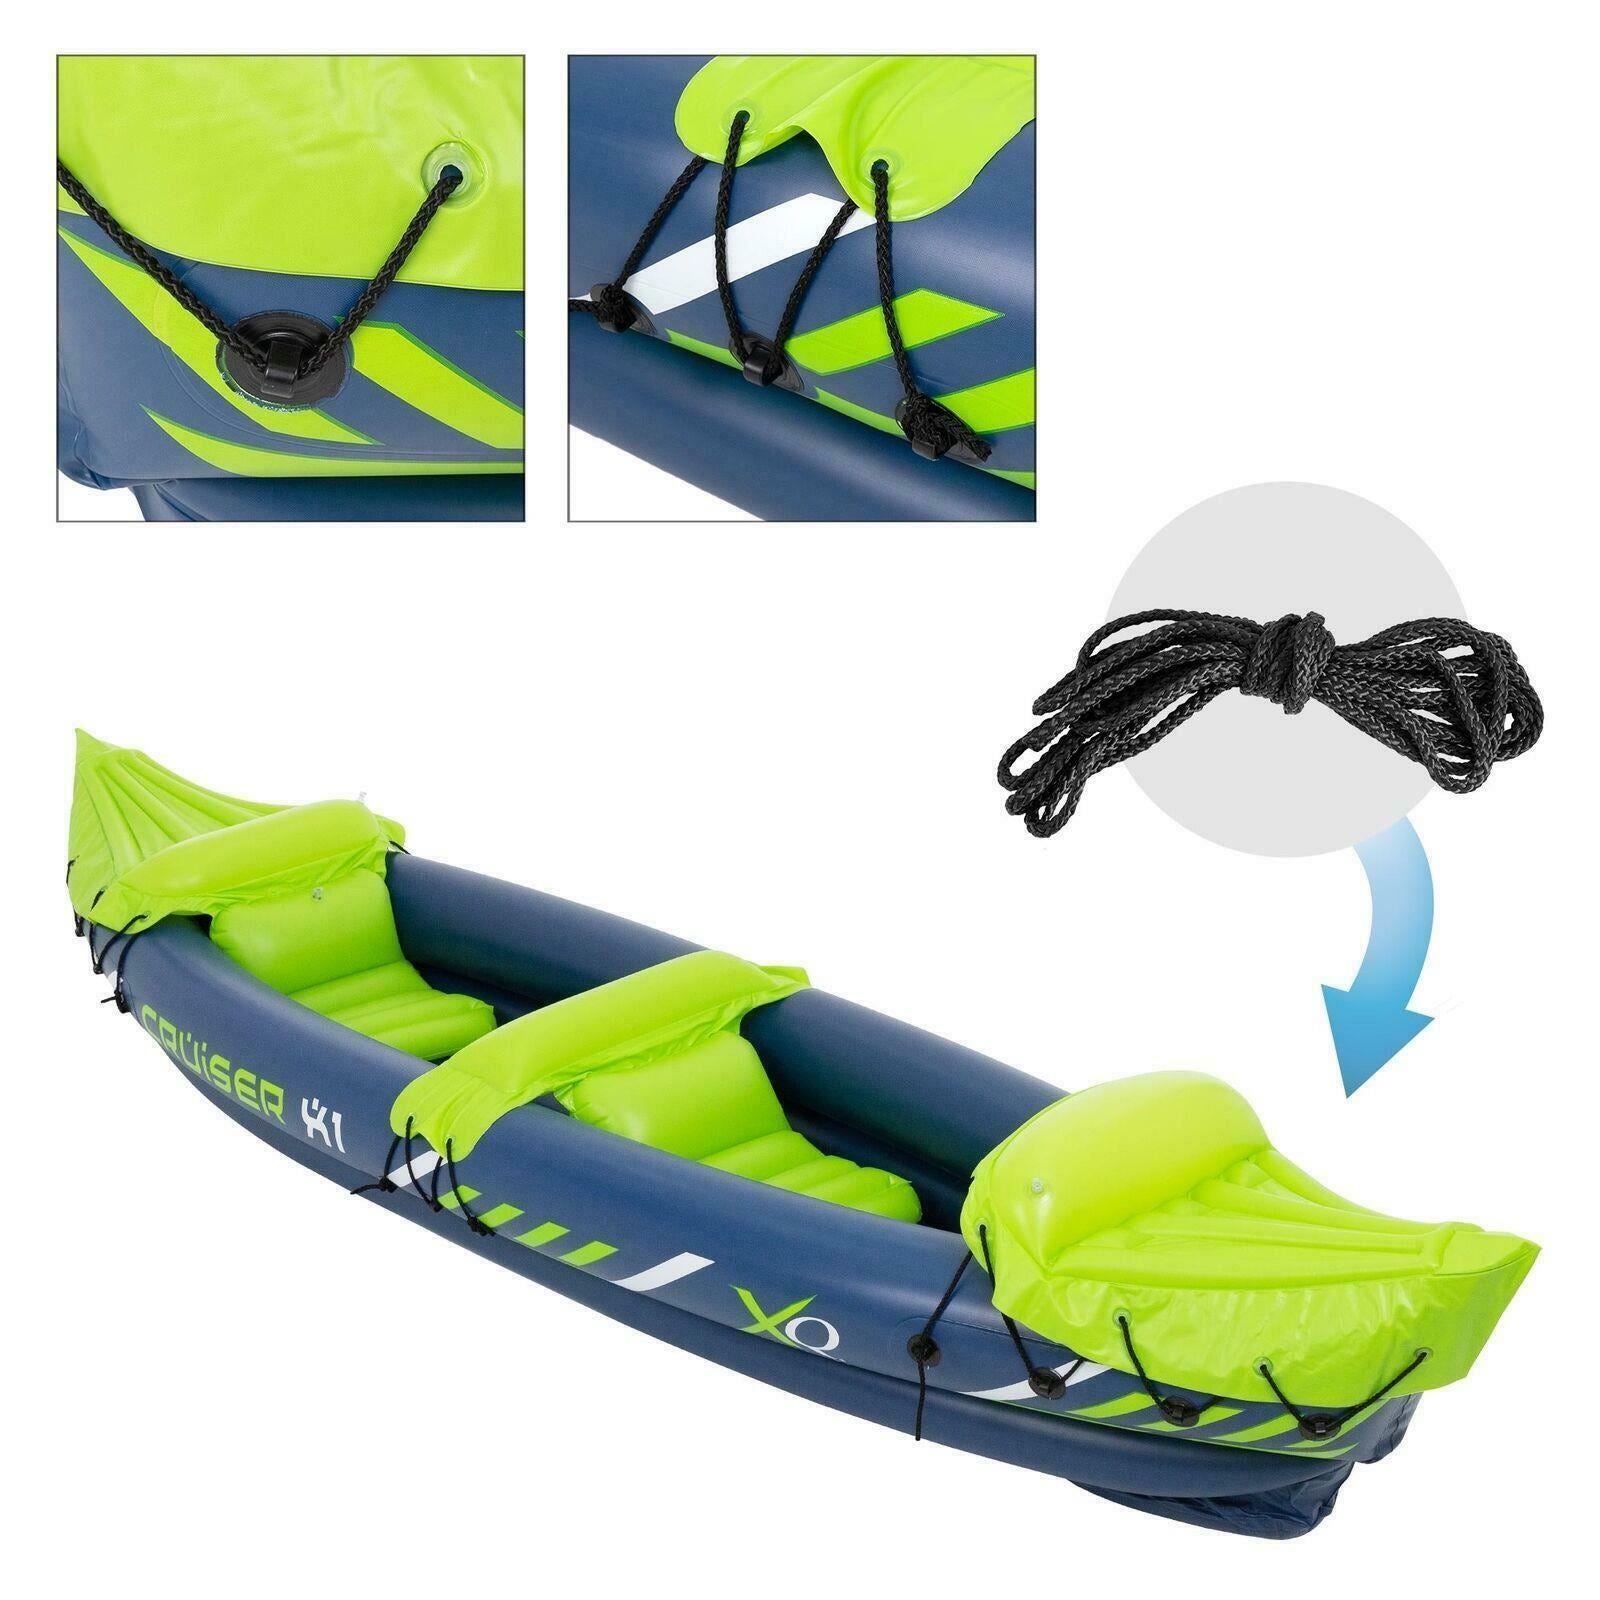 gHOST-7 Inflatable Canoe Kayak Dinghy Boat with Double Paddle 2 - Person by Geezy - The Magic Toy Shop